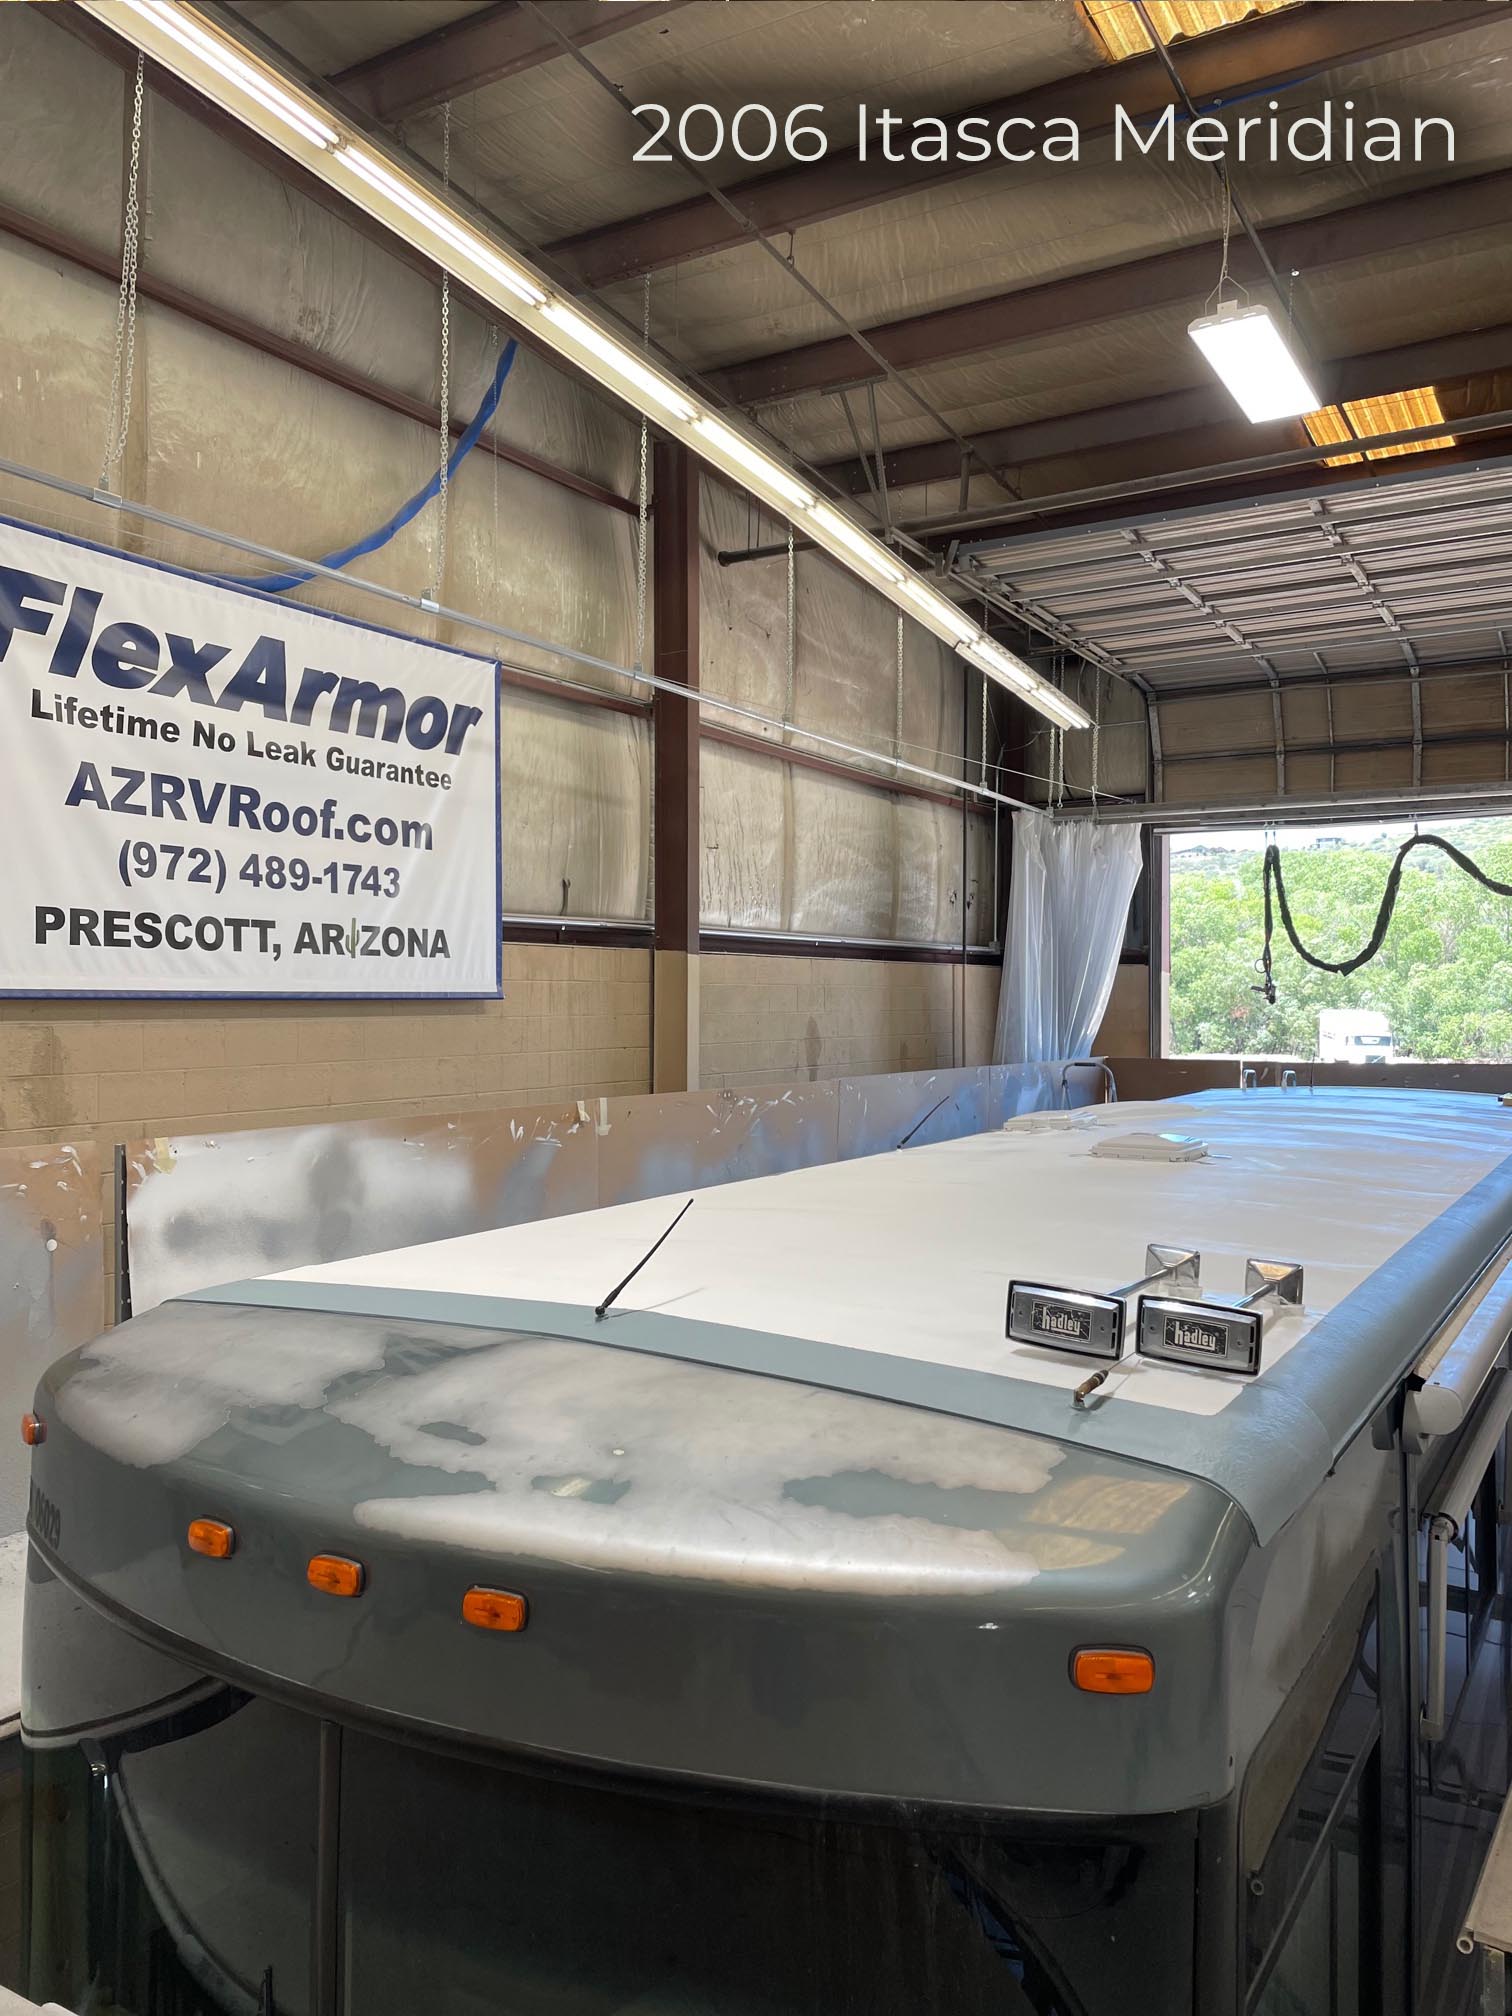 oro valley itasca meridian in shop for rv roof repair